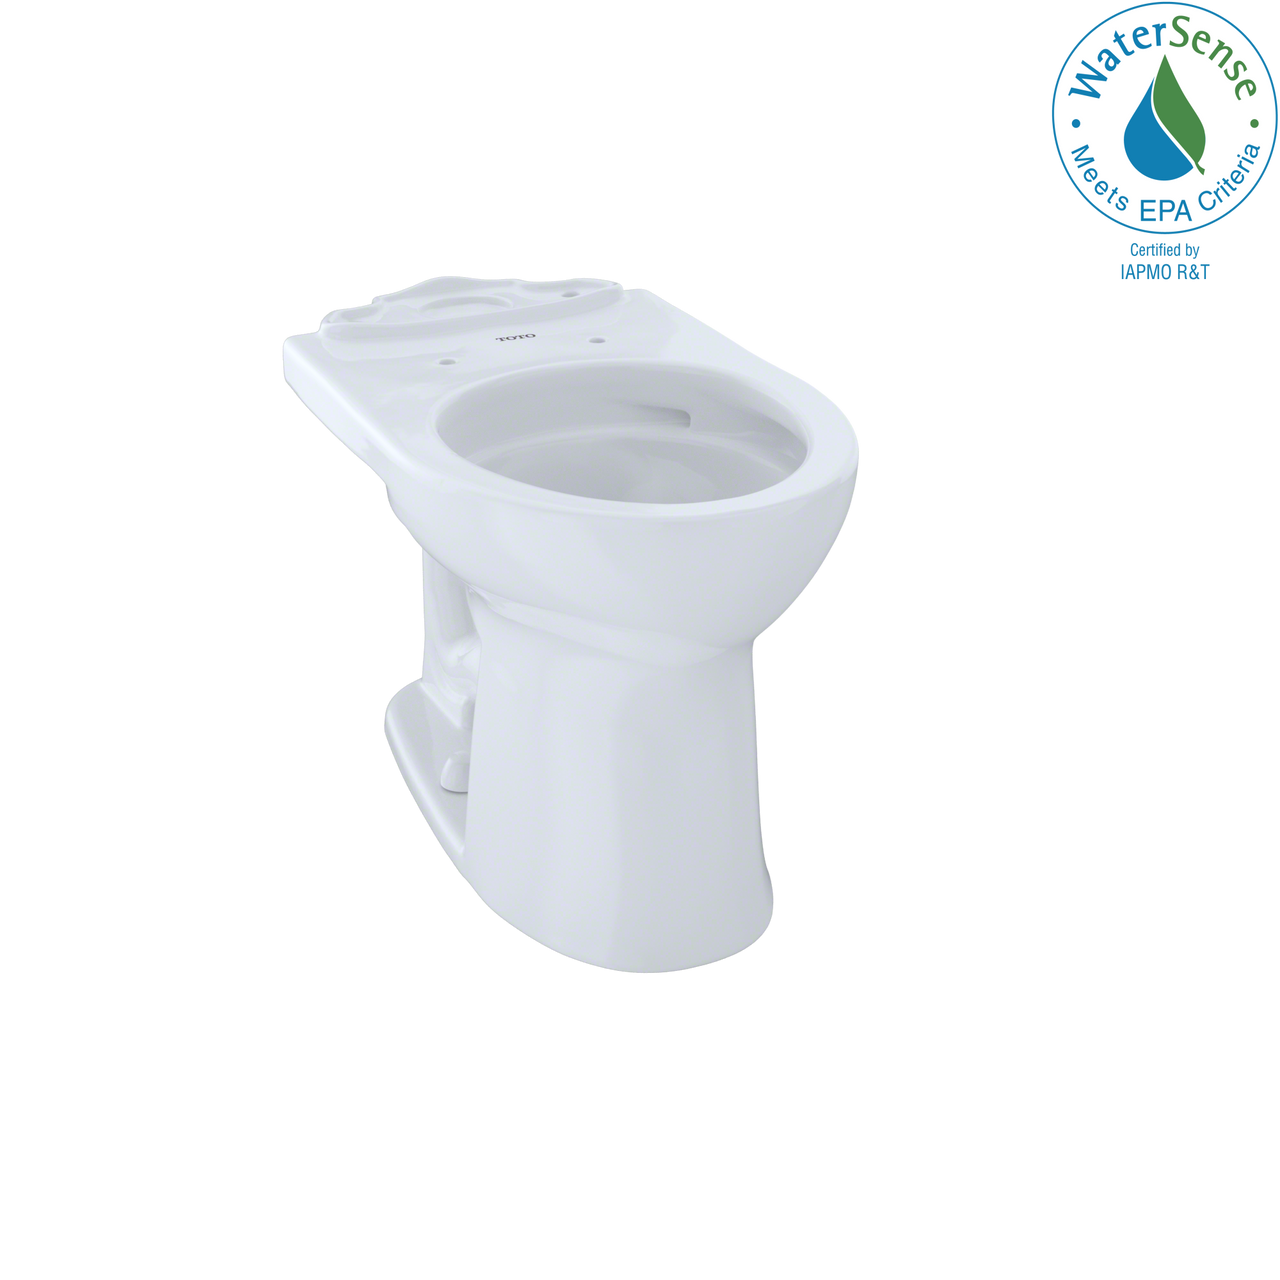 TOTO Drake II Universal Height Round Toilet Bowl with CeFiONtect,  - C453CUFG#01 - BNGBath